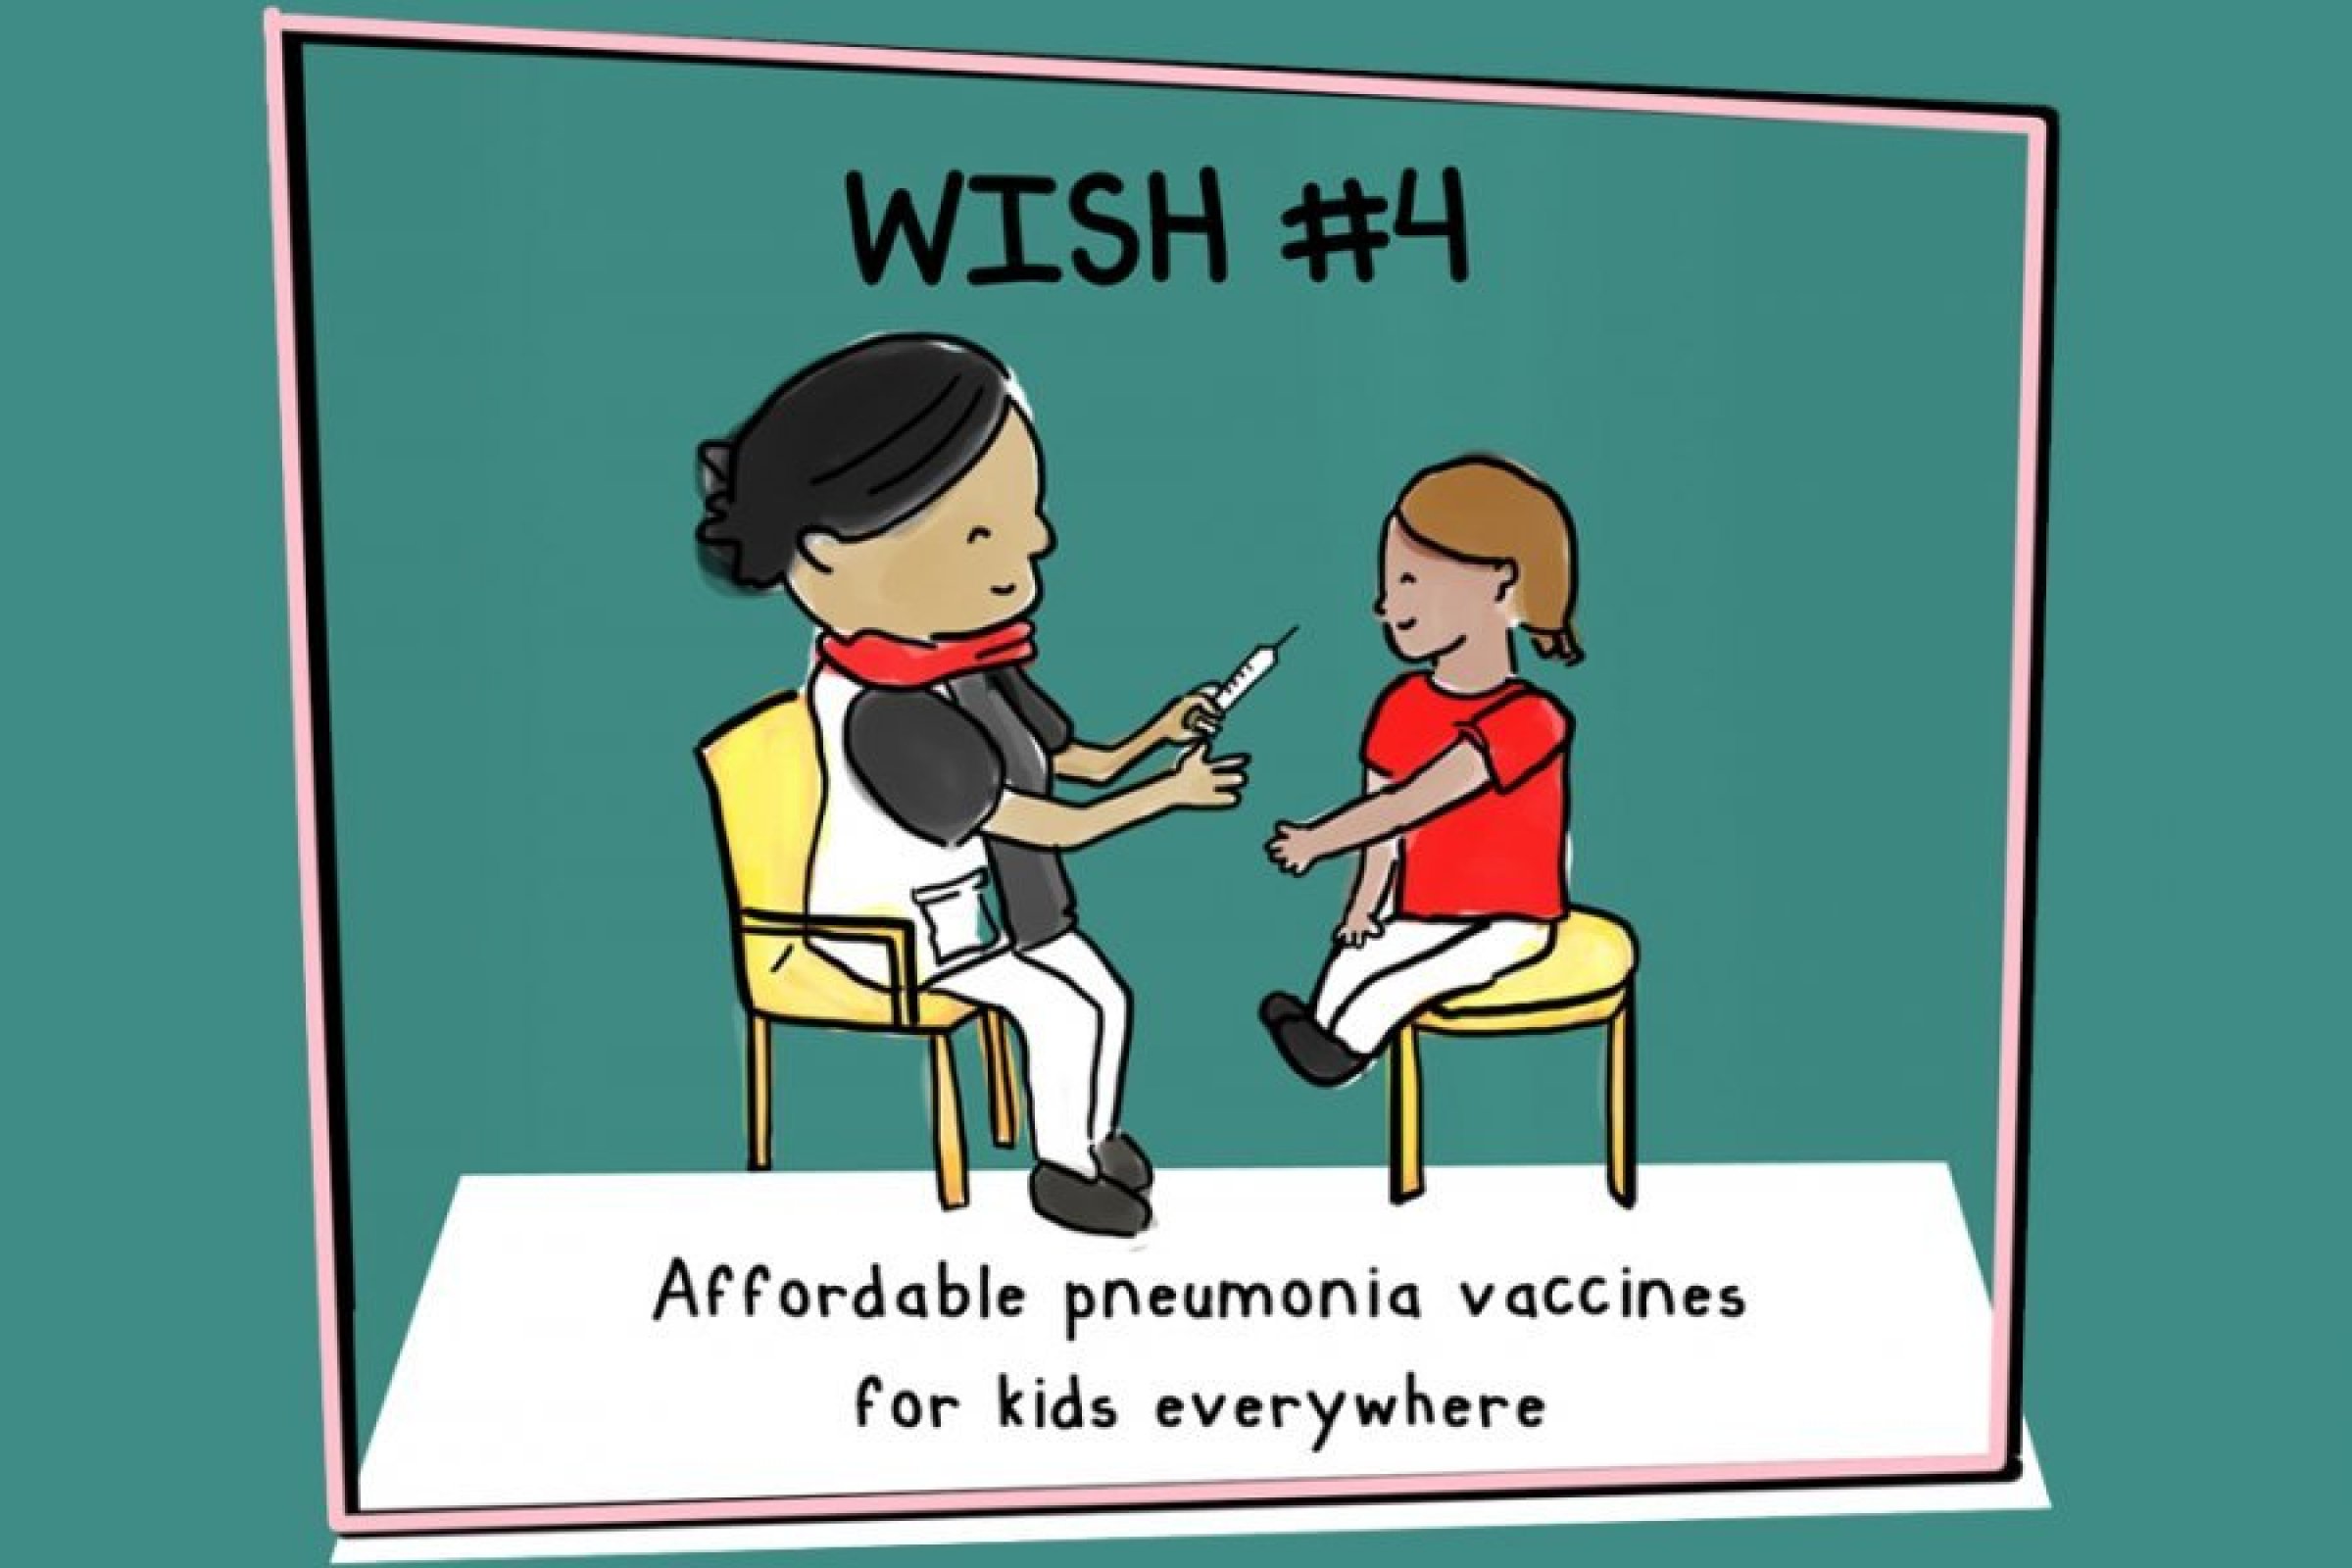 Life-saving pneumonia vaccines must be made available to kids everywhere